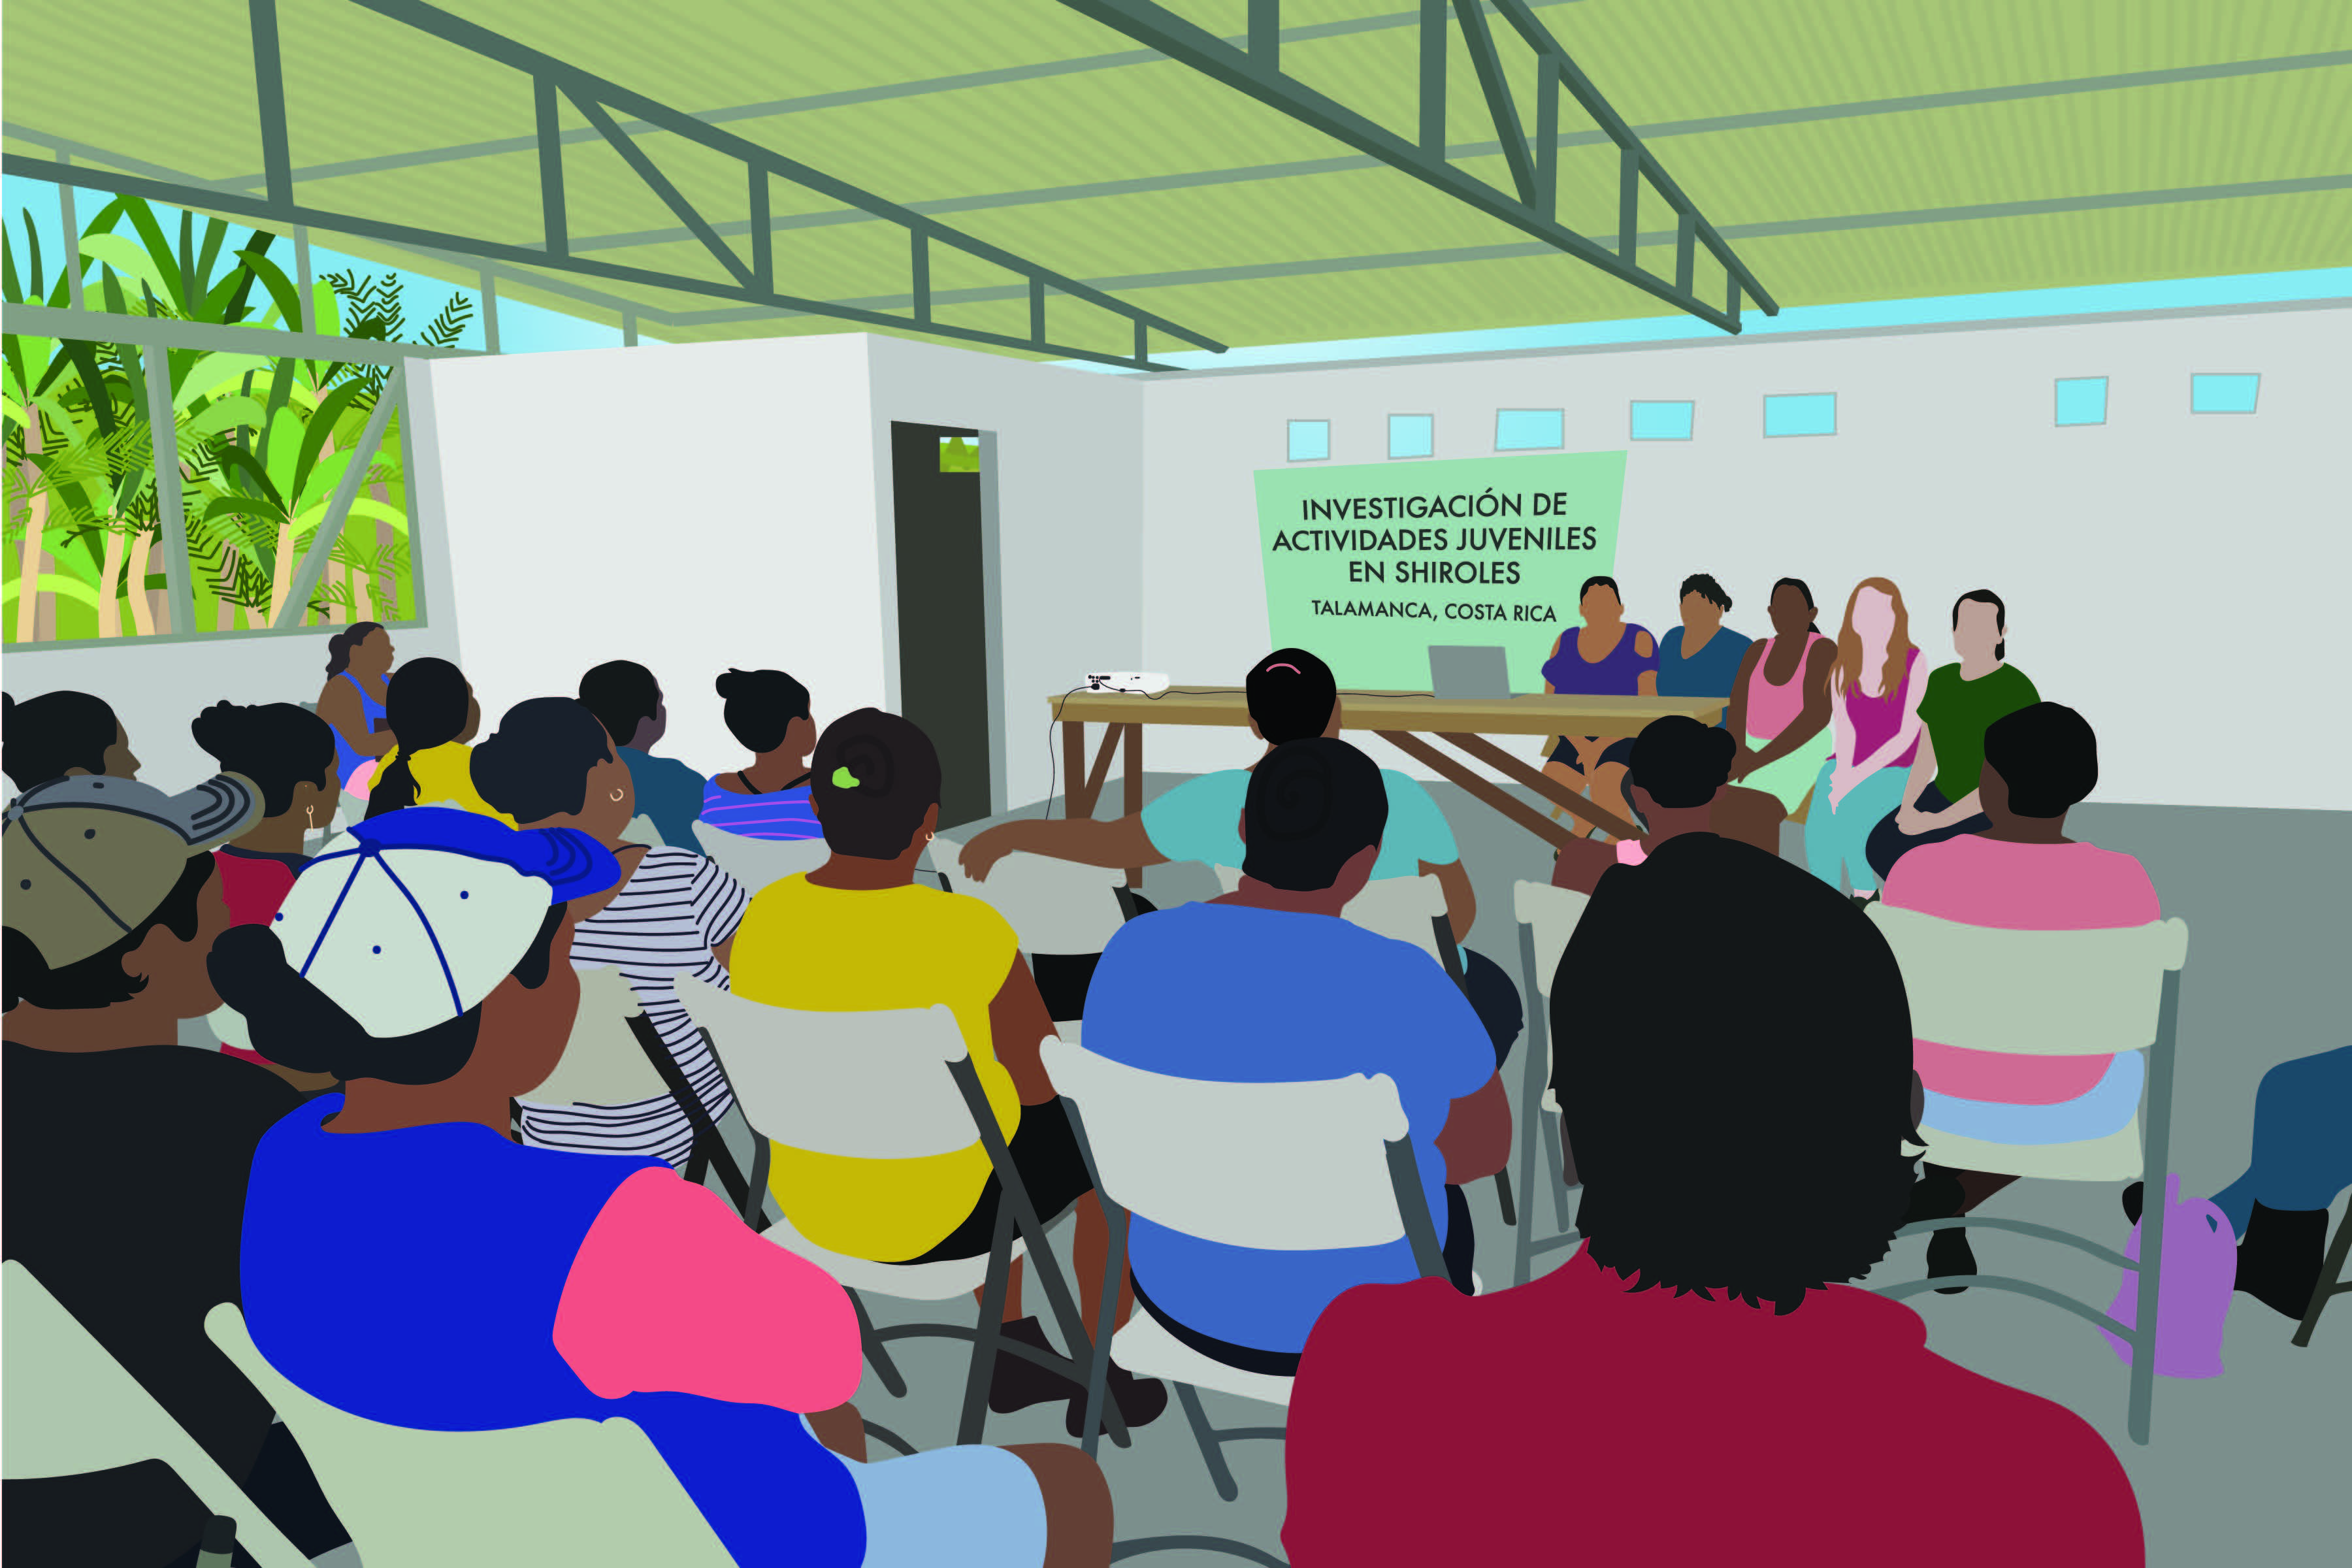 Image shows a group of illustrated people sitting in an audience for a presentation.